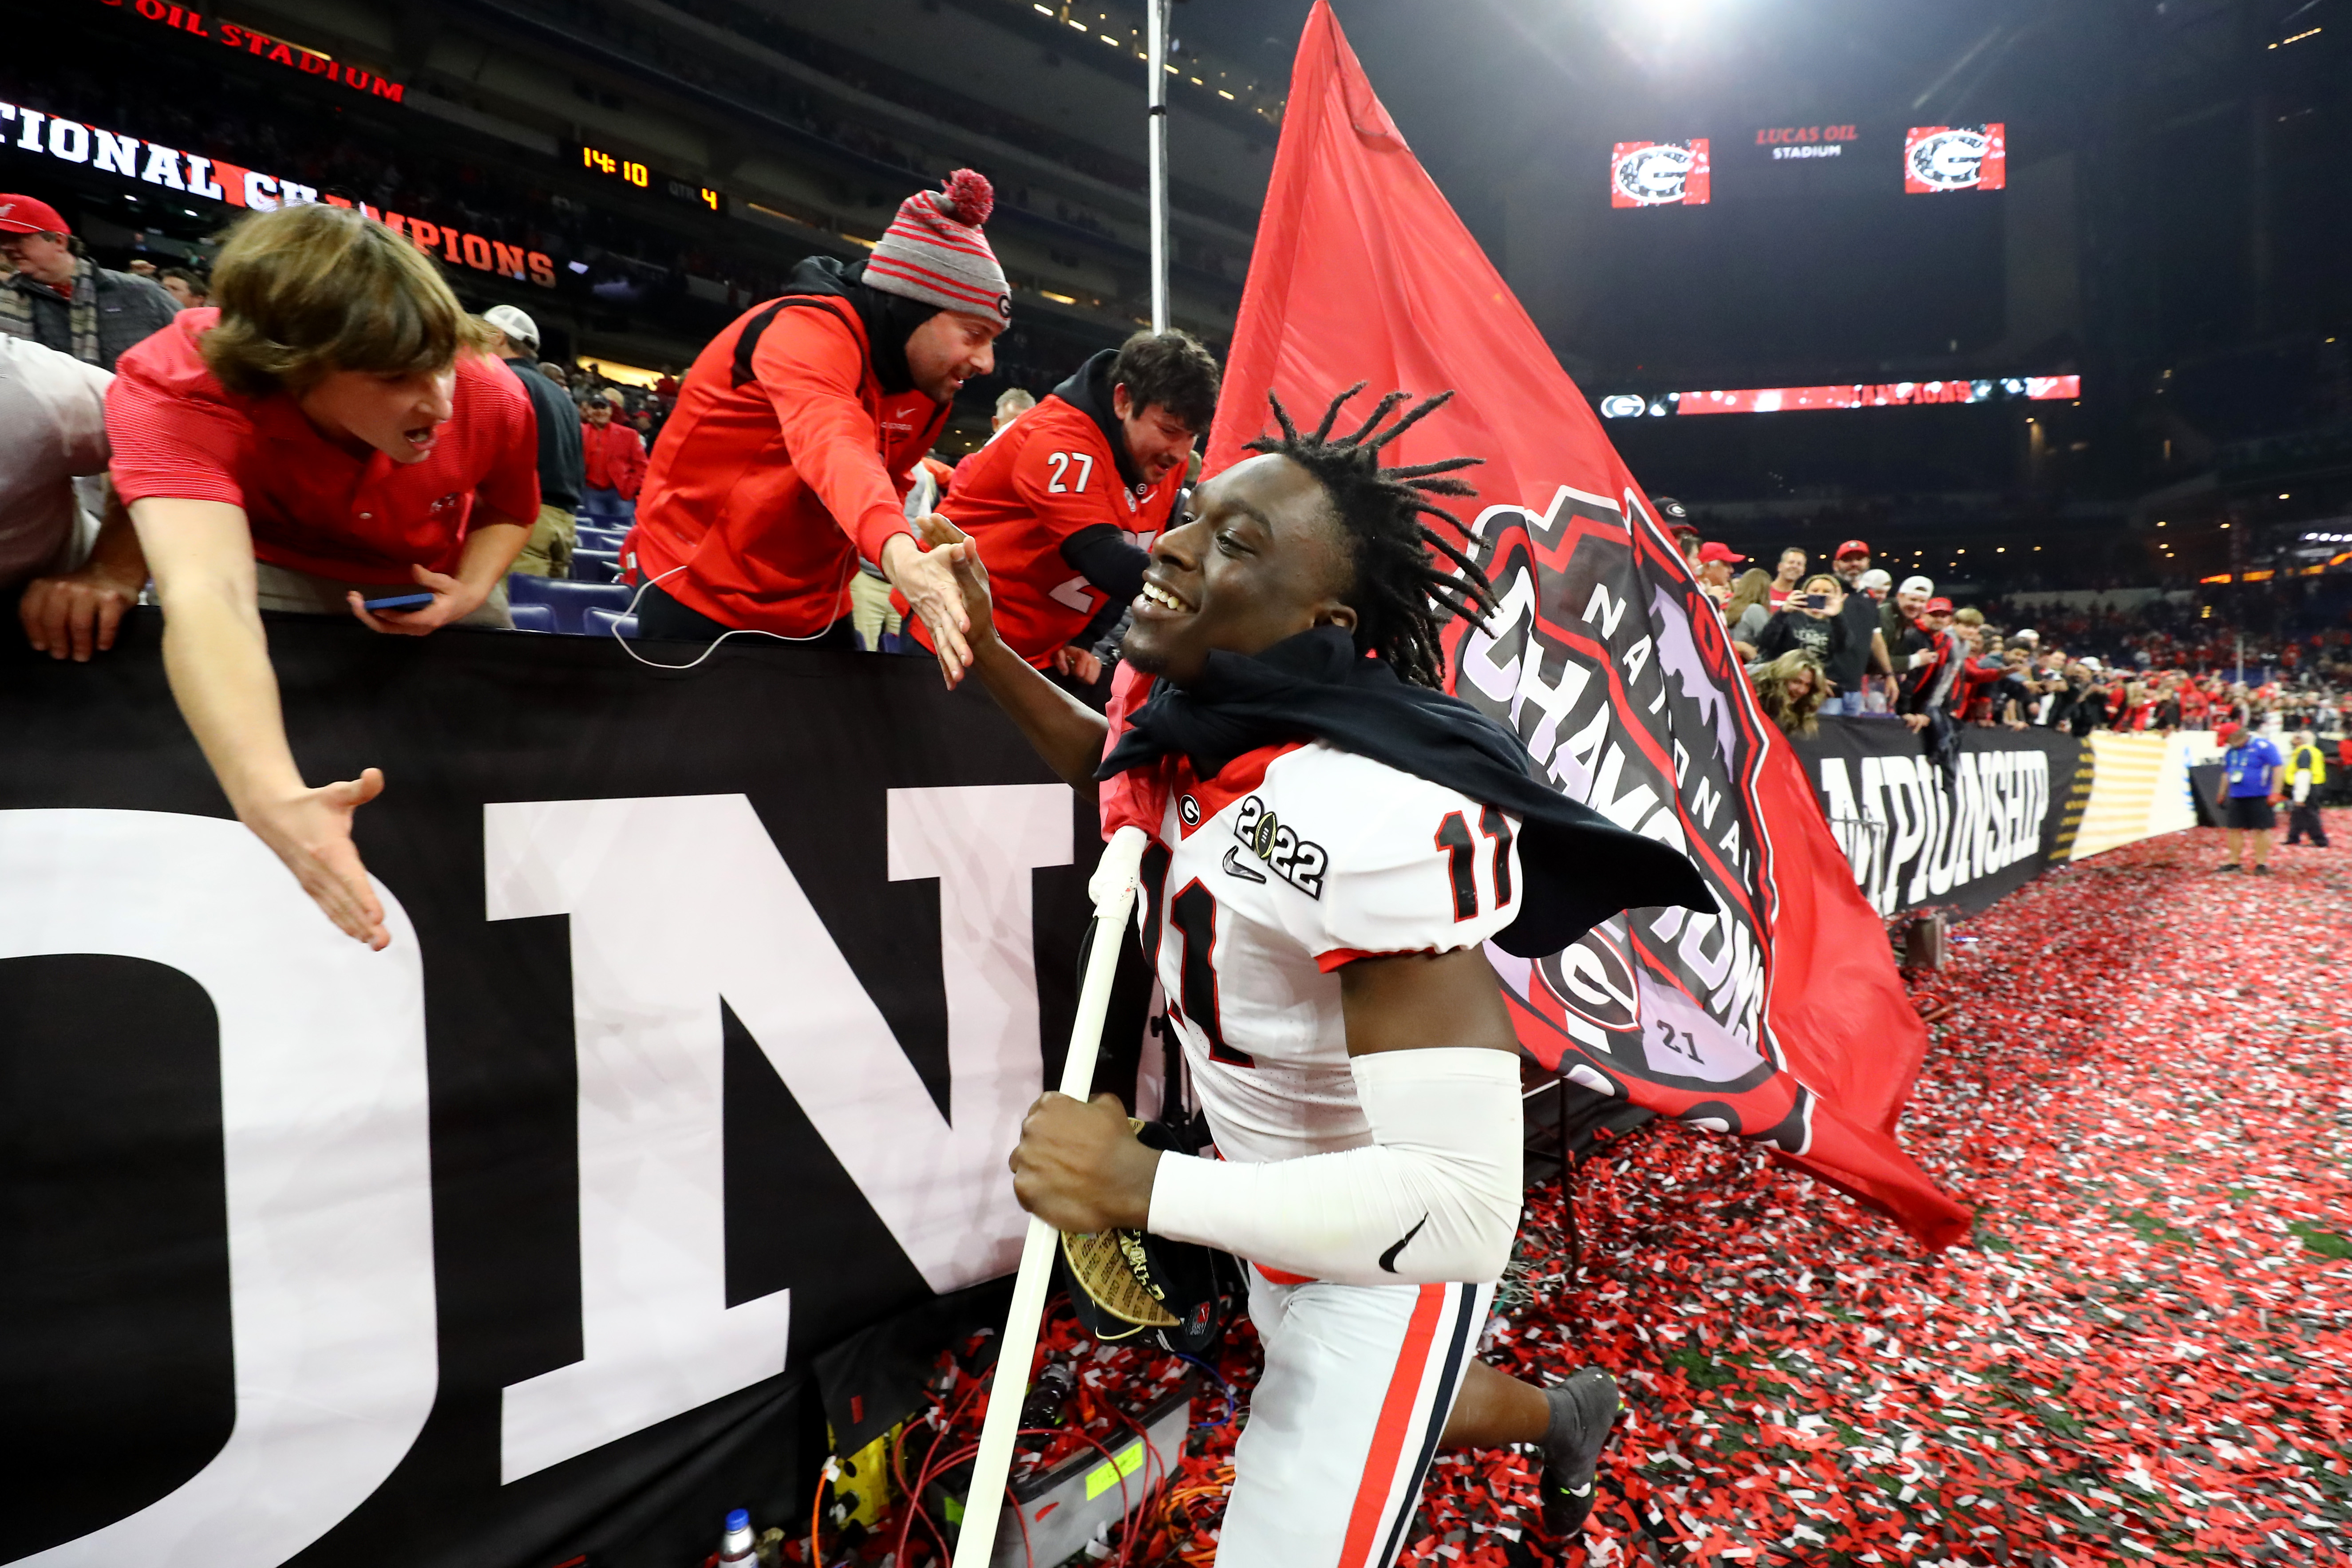 Georgia's Derion Kendrick selected with 212th pick in NFL draft